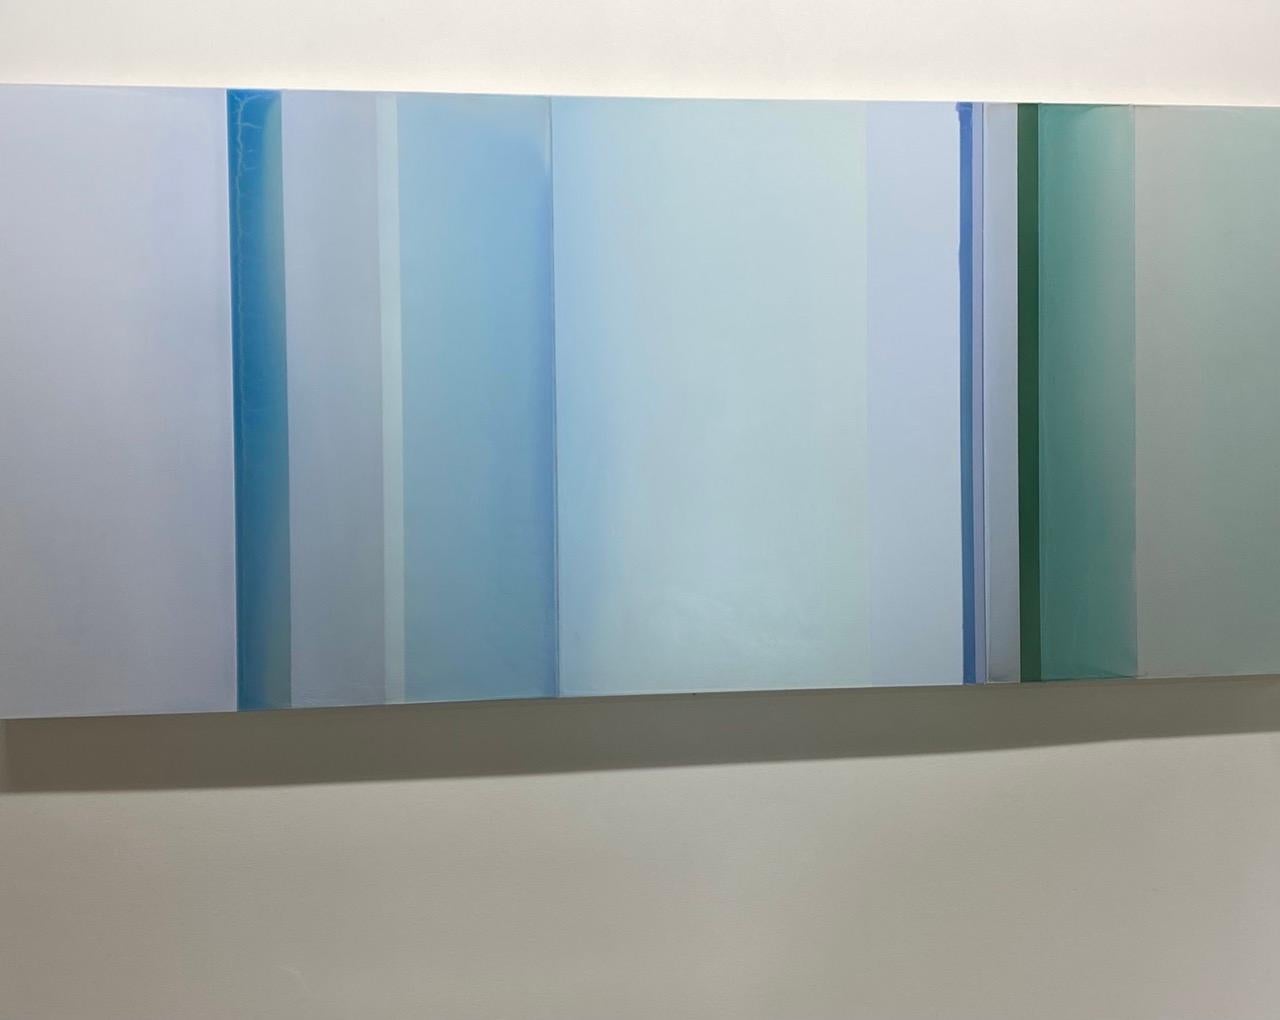 The surface of Shades of Ocean by Susan English is a wonderful play of color, light, and composition. Hues of soft blue, pale teal bluish green, gray periwinkle blue, cerulean and hunter green meet and merge in softly transitioning planes. The